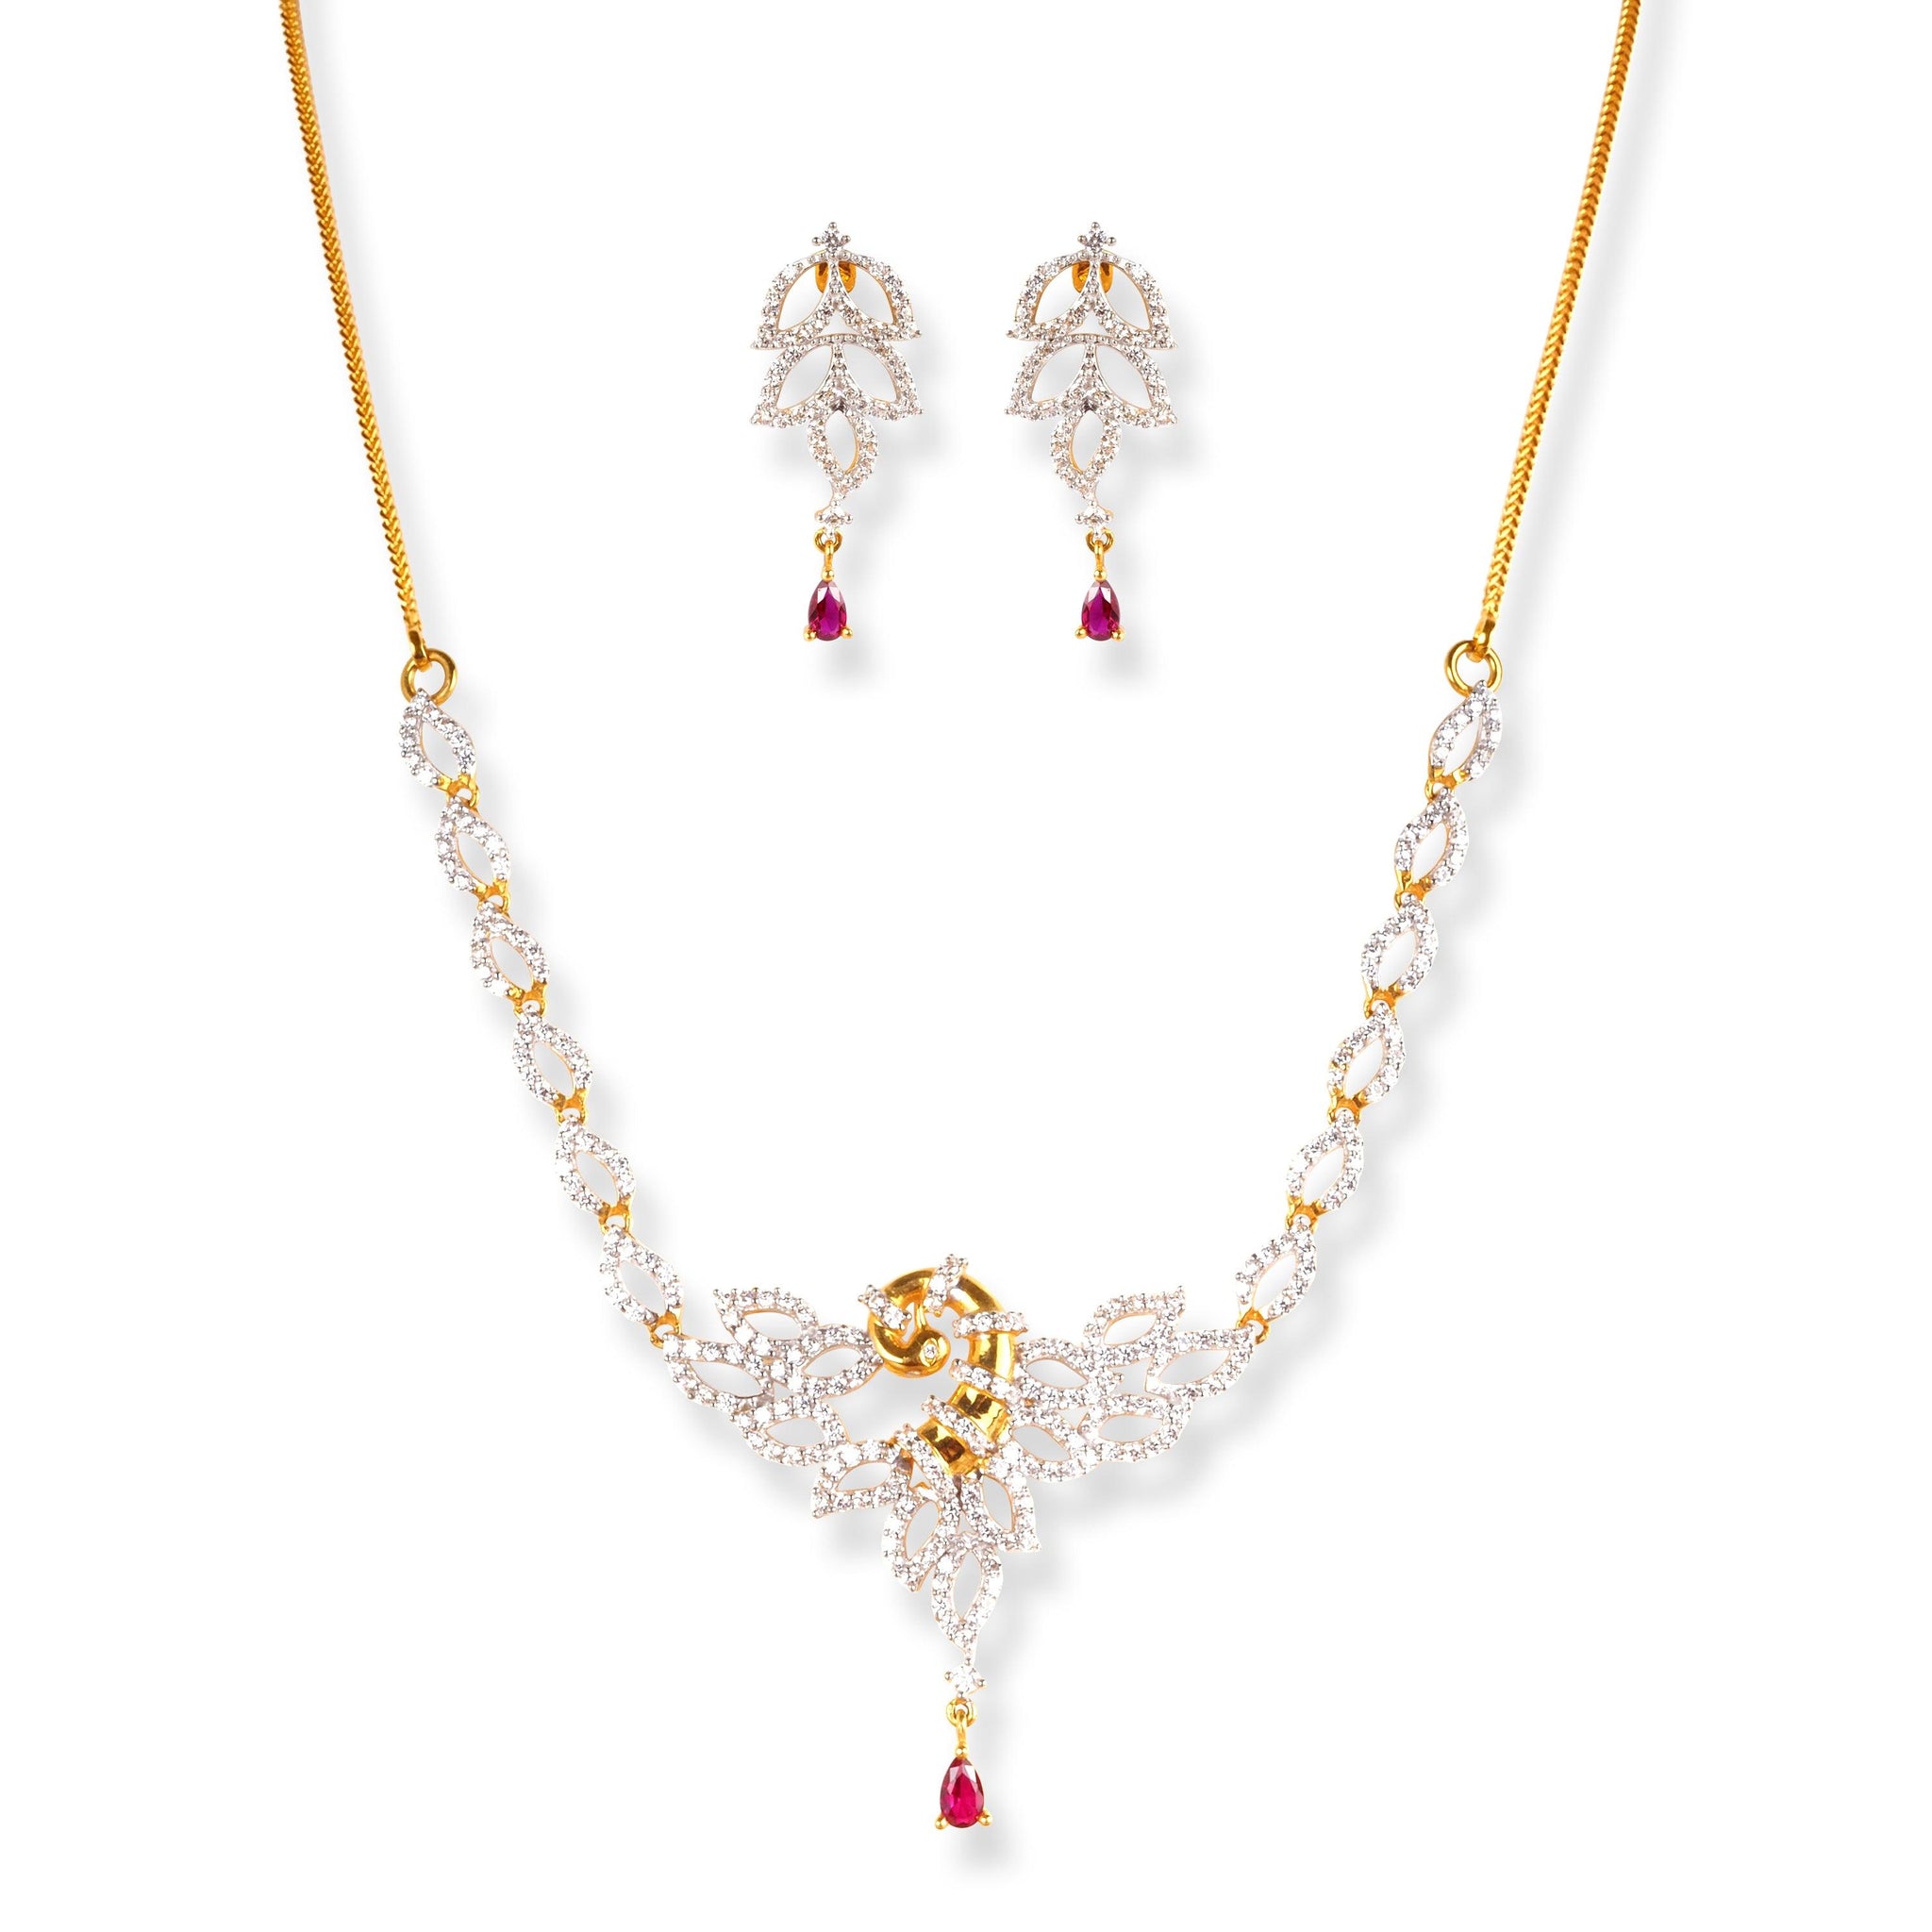 22ct Gold Necklace set with Swarovski Zirconia's and Red Stones - NS14058